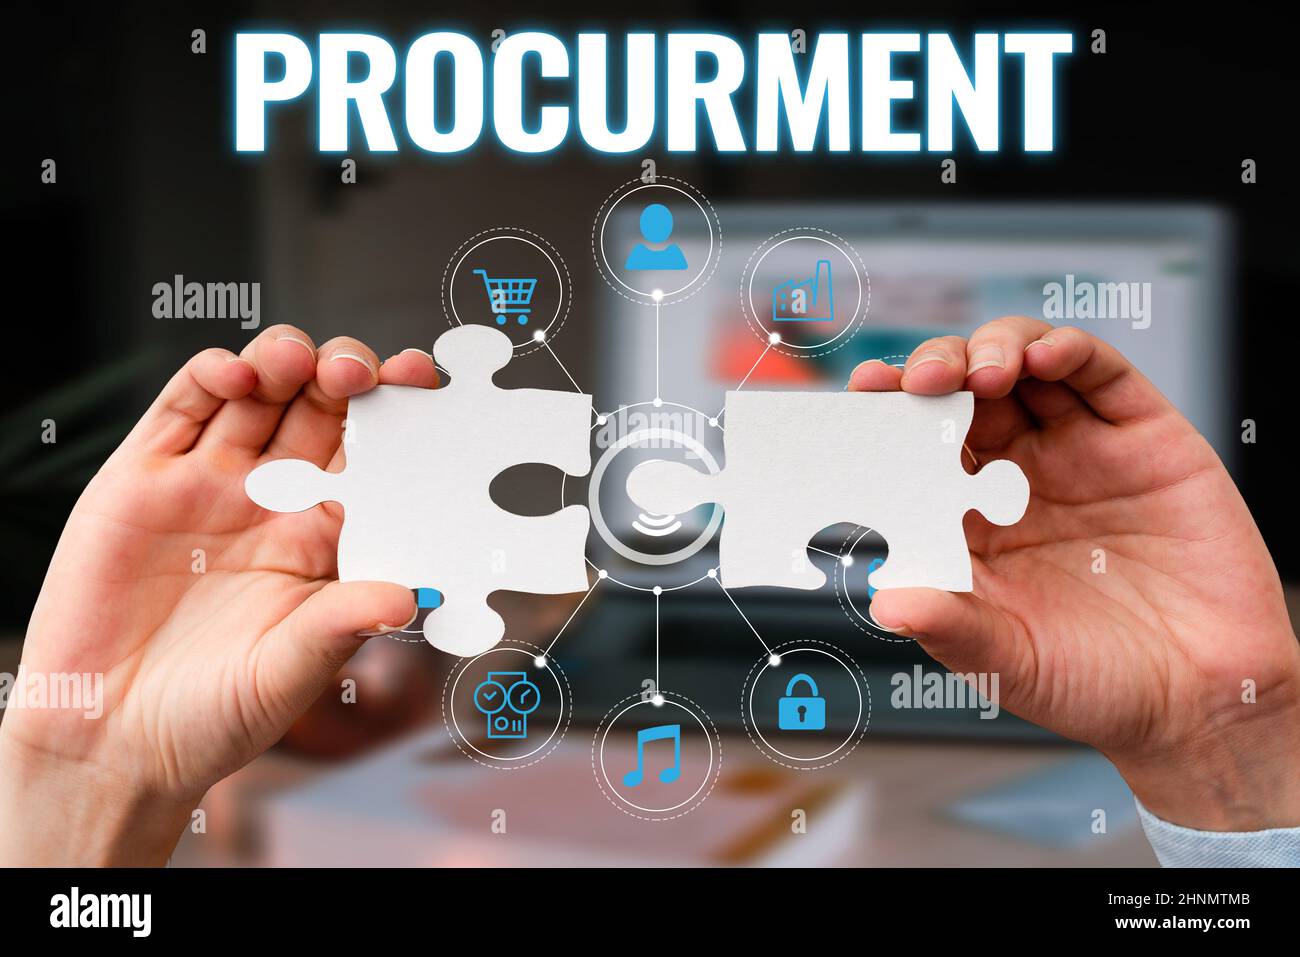 Sign displaying Procurment, Business idea action of acquiring military equipment and supplies Business Woman Holding Jigsaw Puzzle Piece Unlocking New Stock Photo